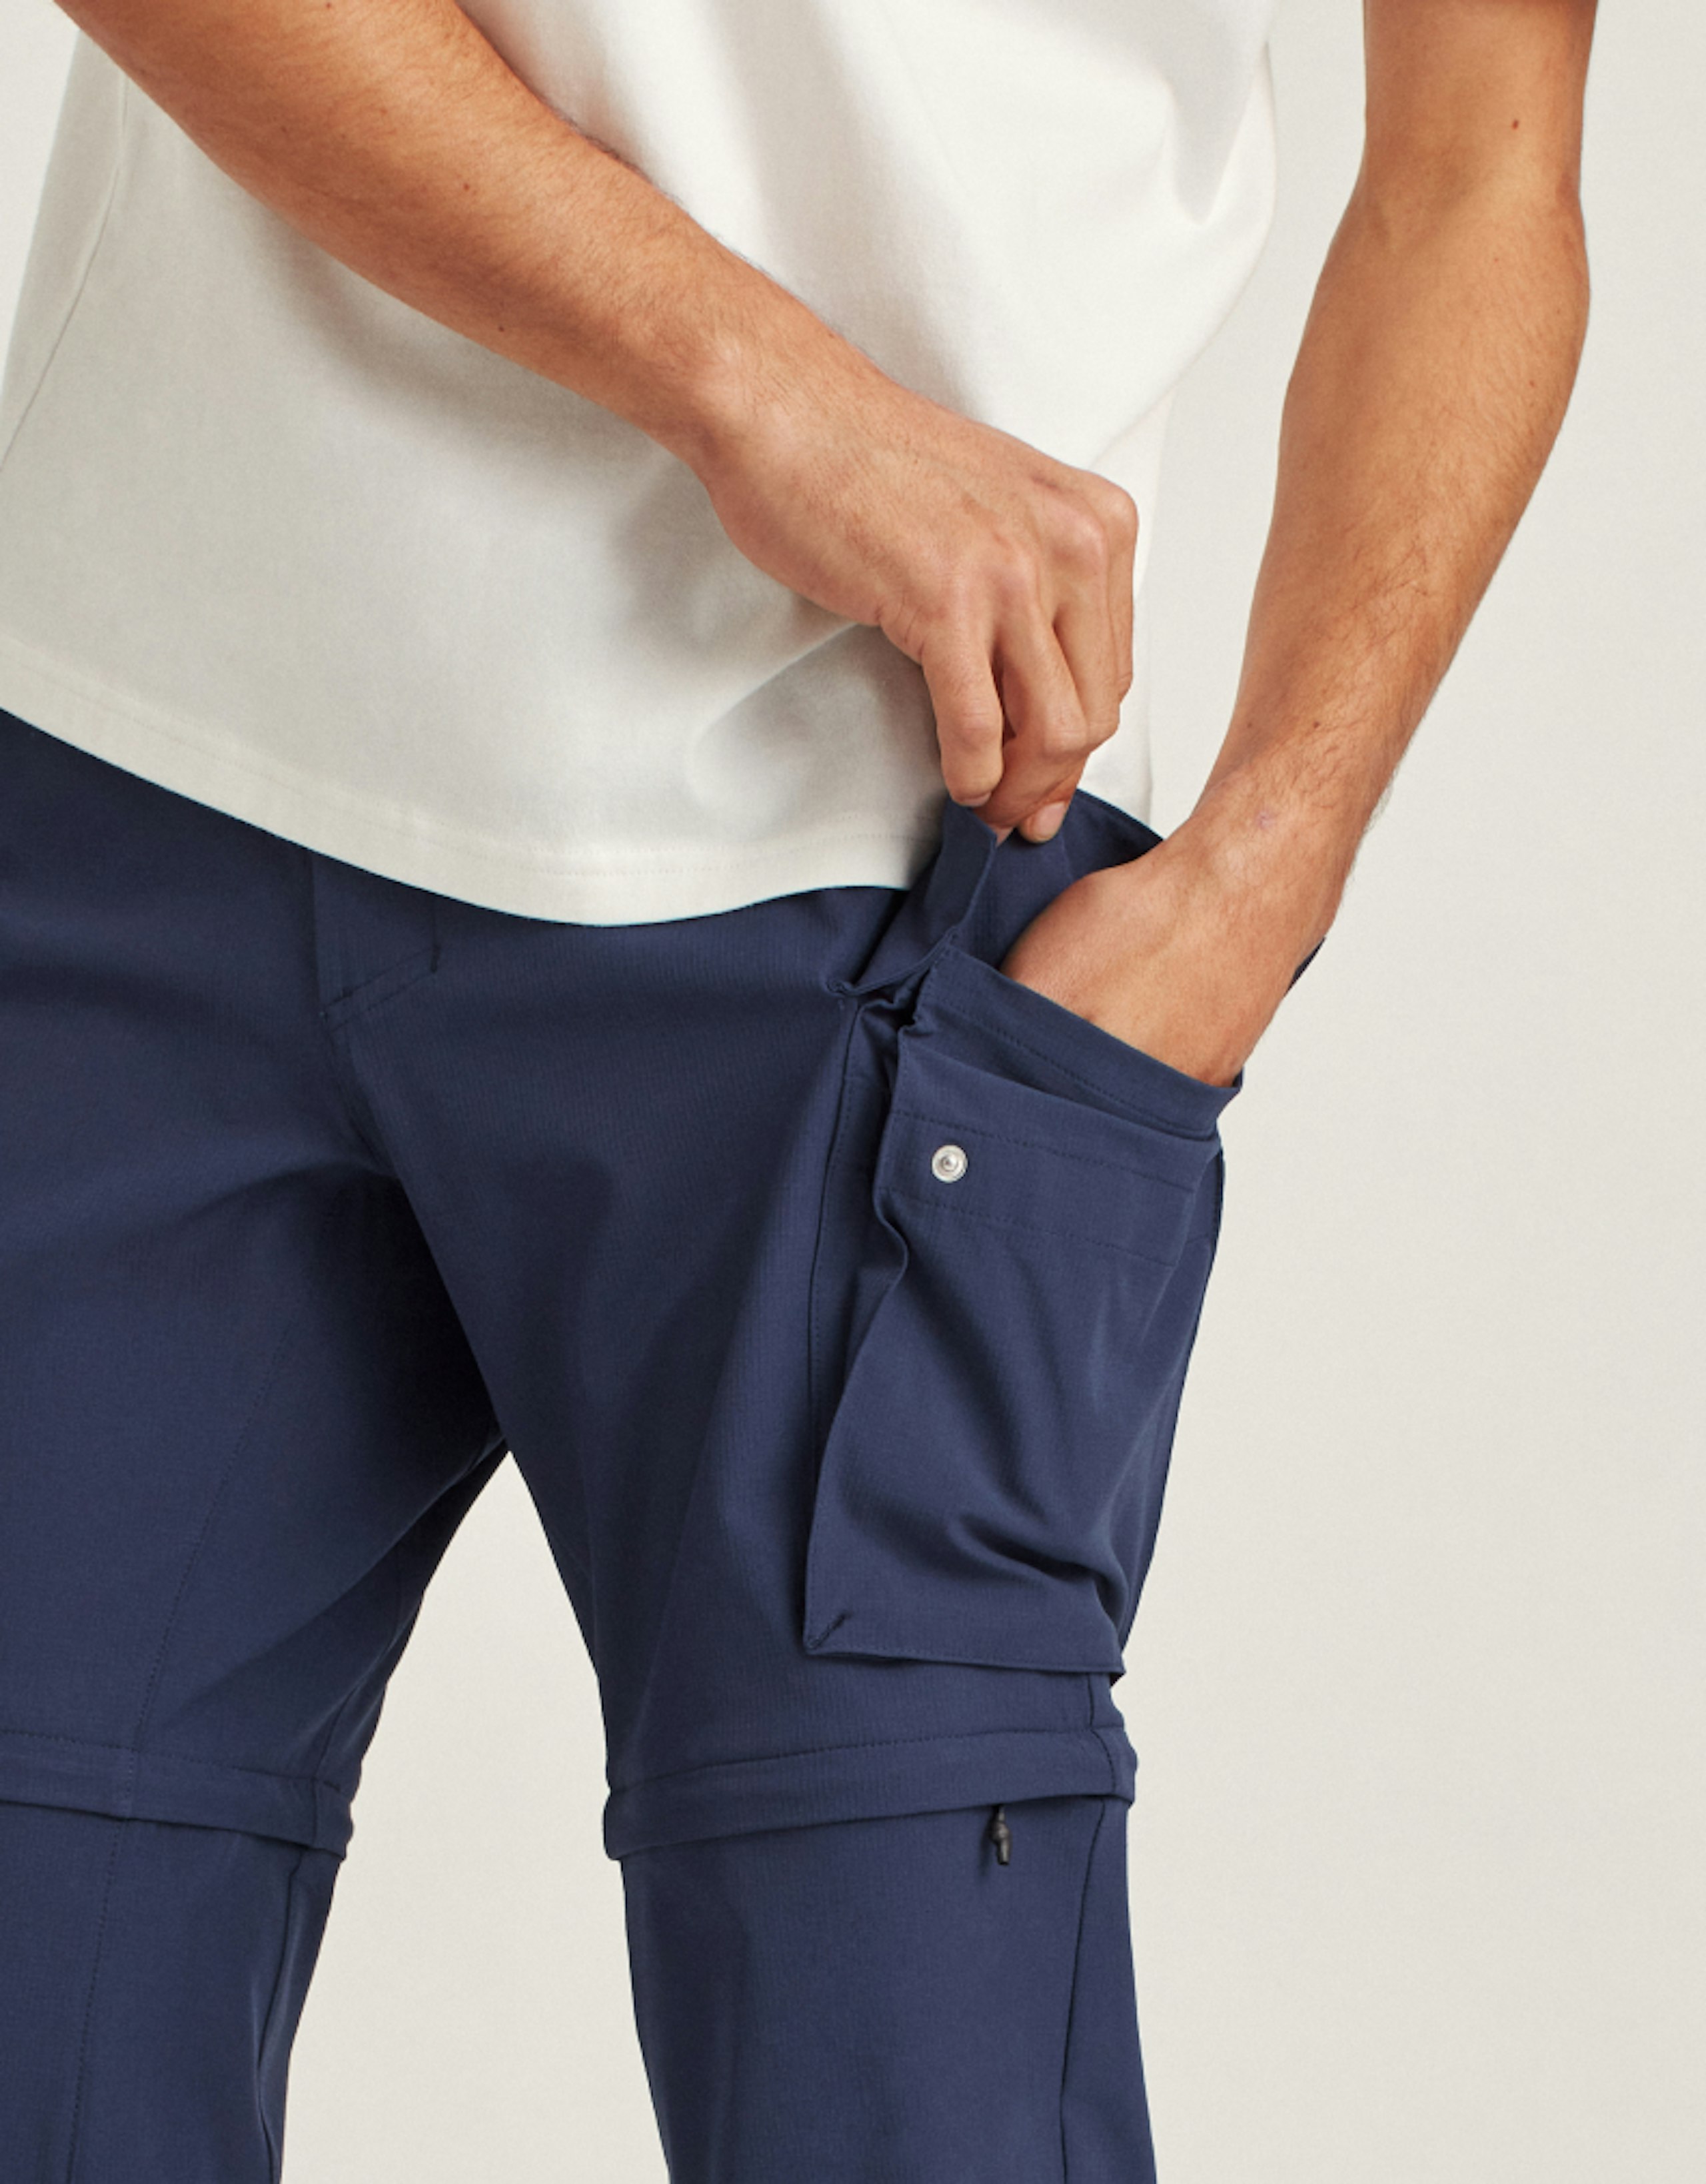 Man in blue Stretch Convertible Cargo Pant demonstrating functionality of pocket by putting hand in pocket.